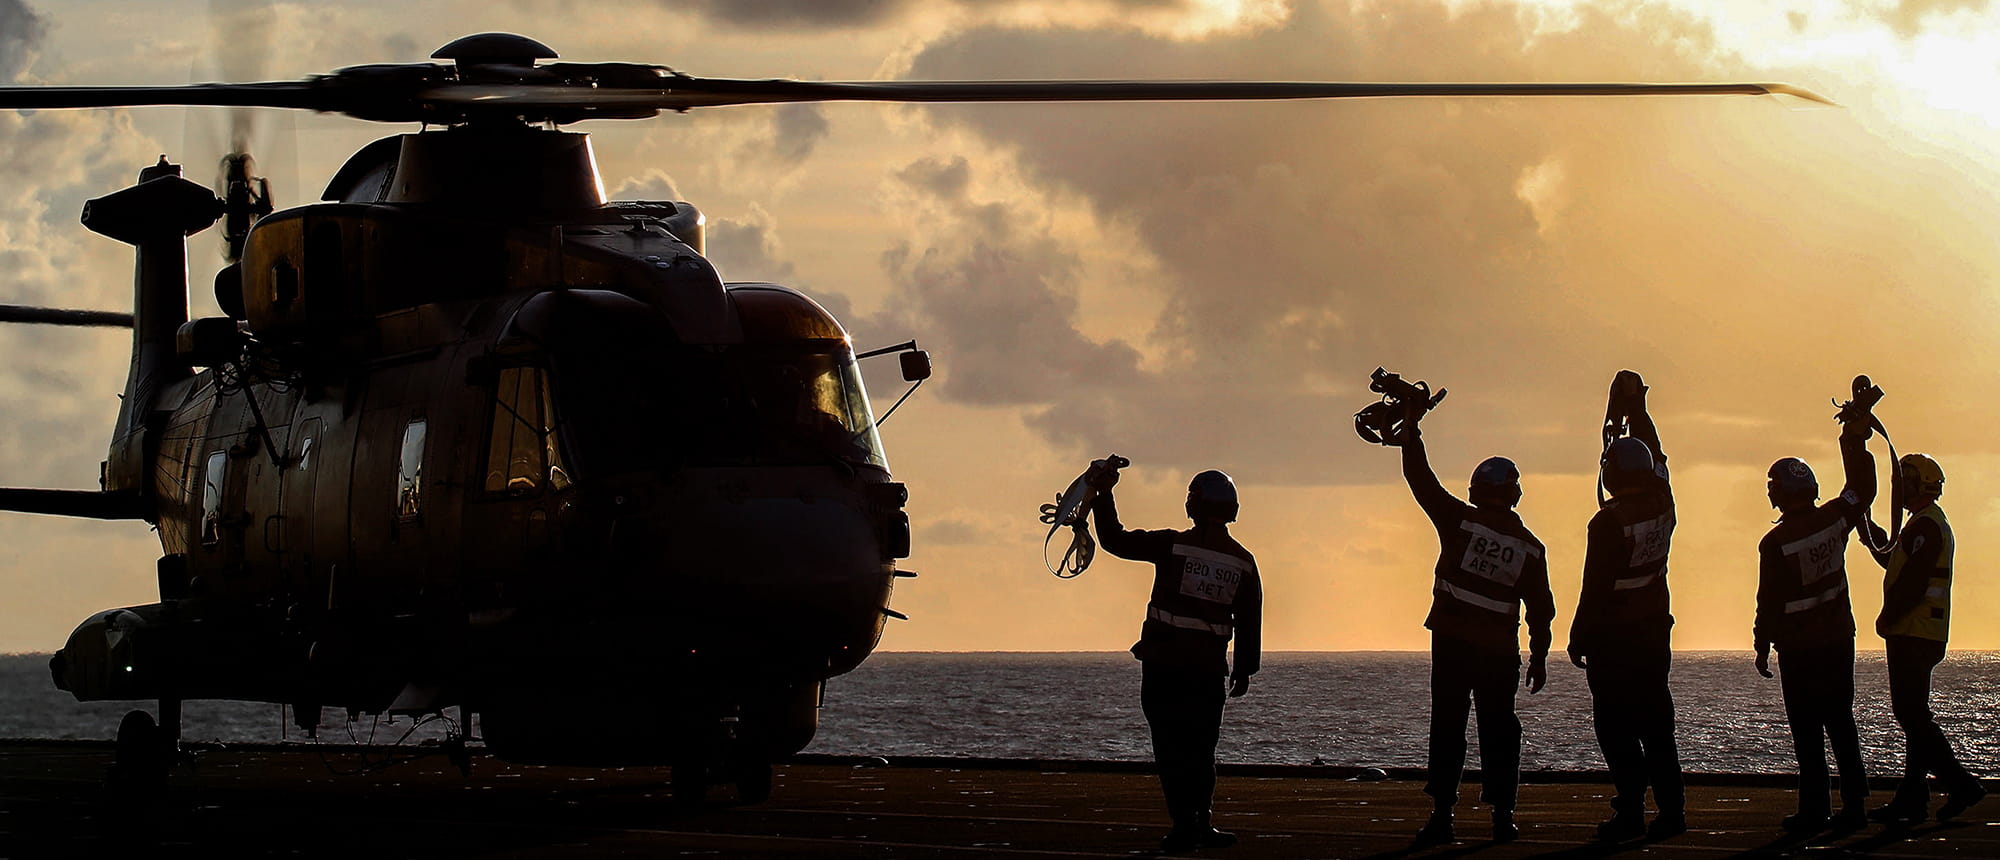 Royal Navy crewmembers waving at a helicopter on the flight at sunset